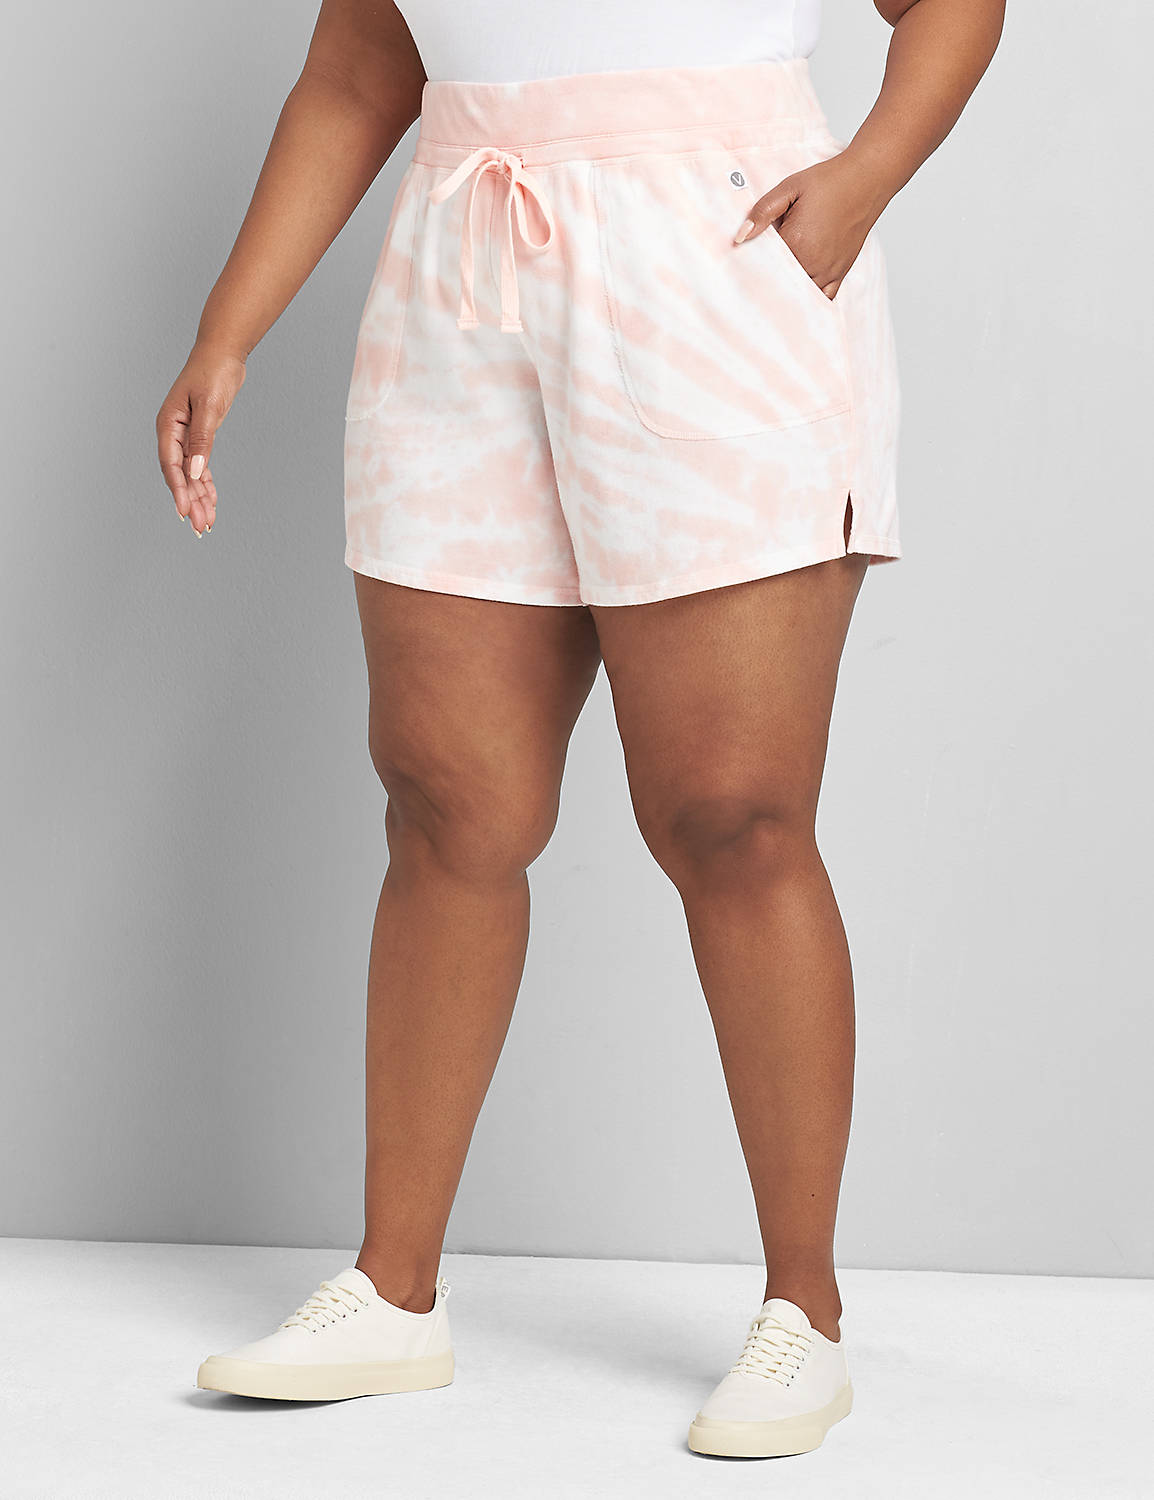 French Terry Dye Effect Short S 1119099:Sunset Pink Pearl 40-0005-11:22/24 Product Image 1